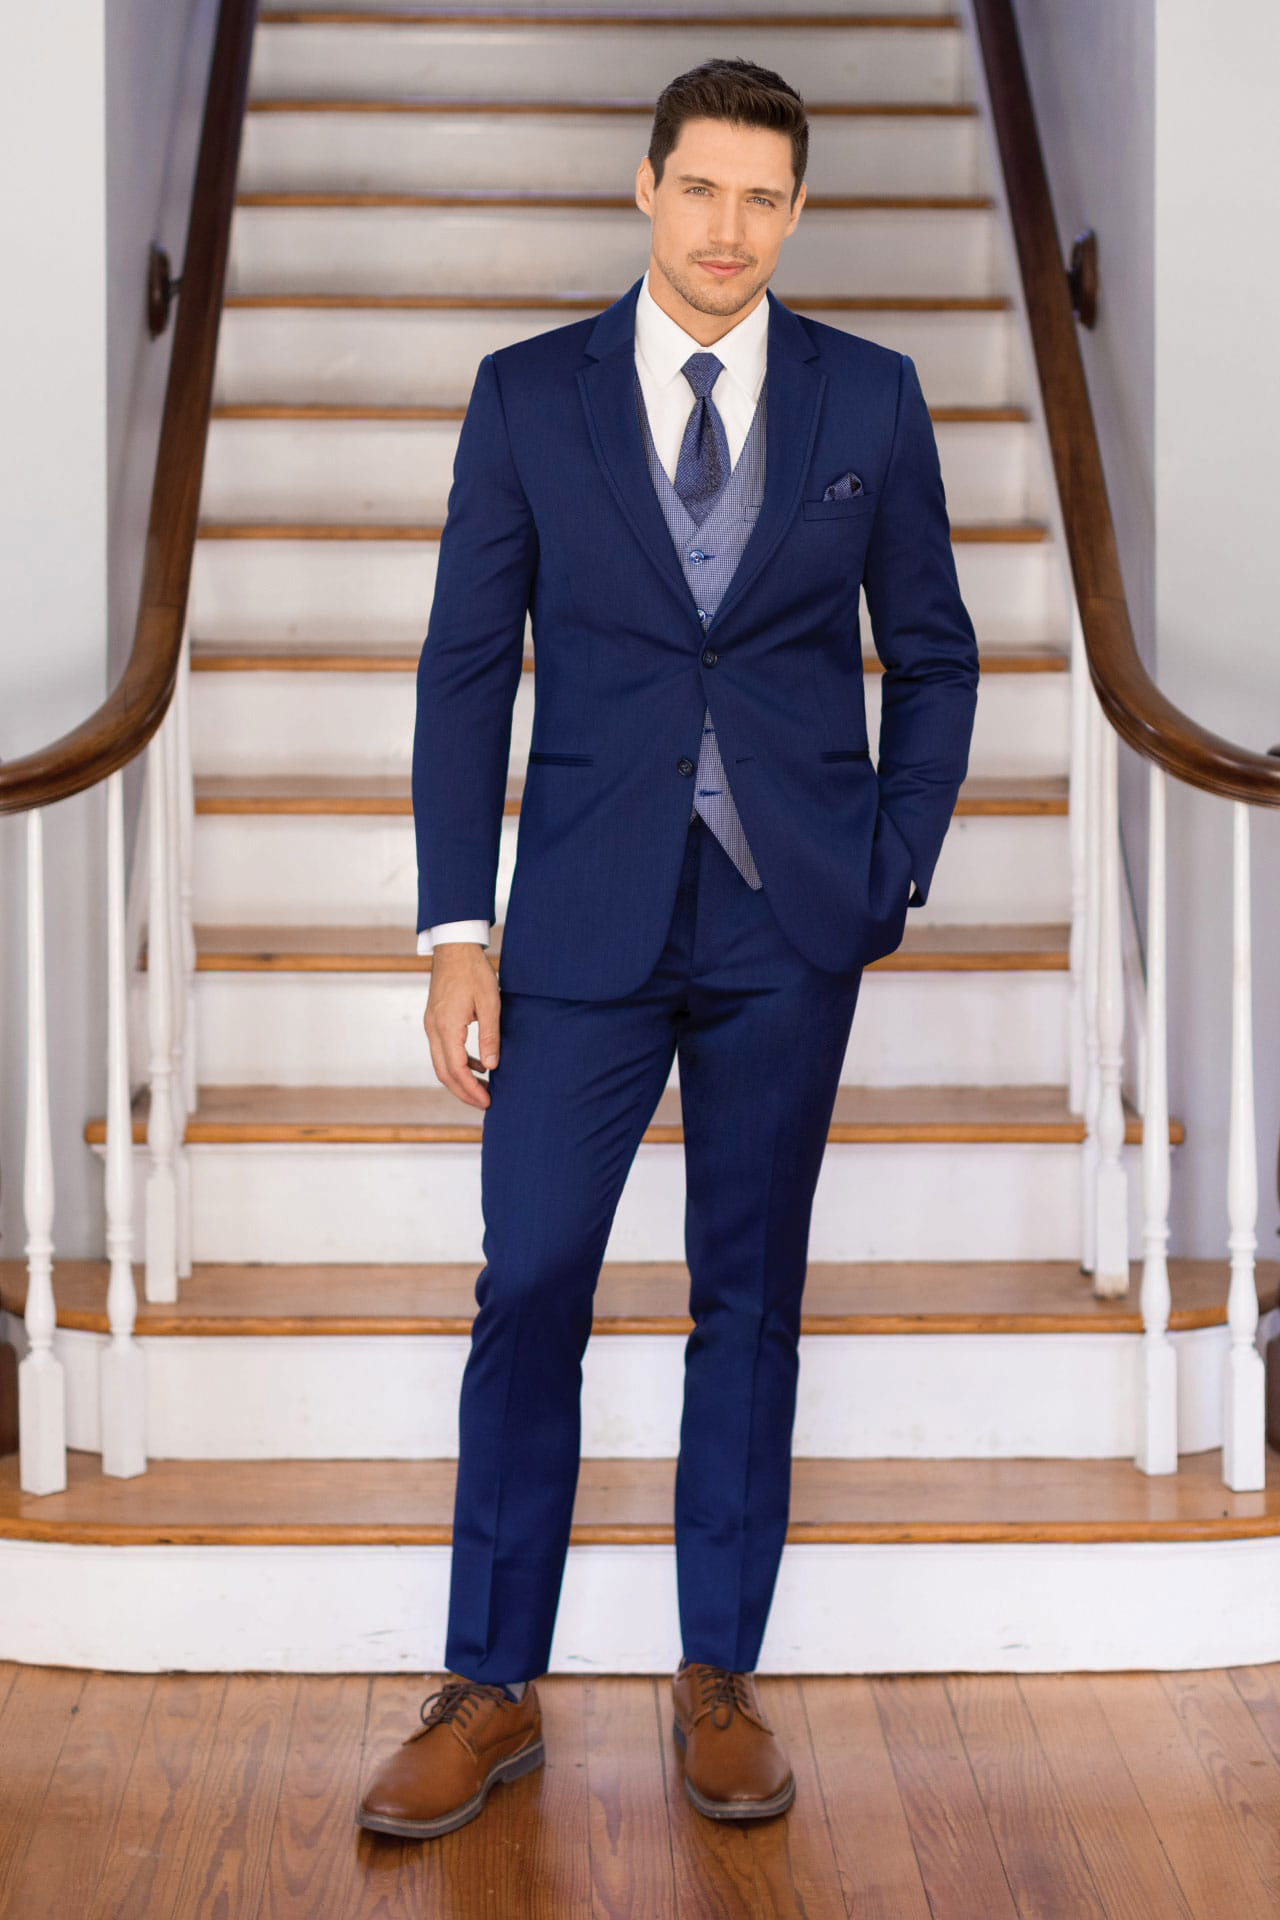 three-piece blue wedding suit, white shirt, blue tie, and brown derby shoes